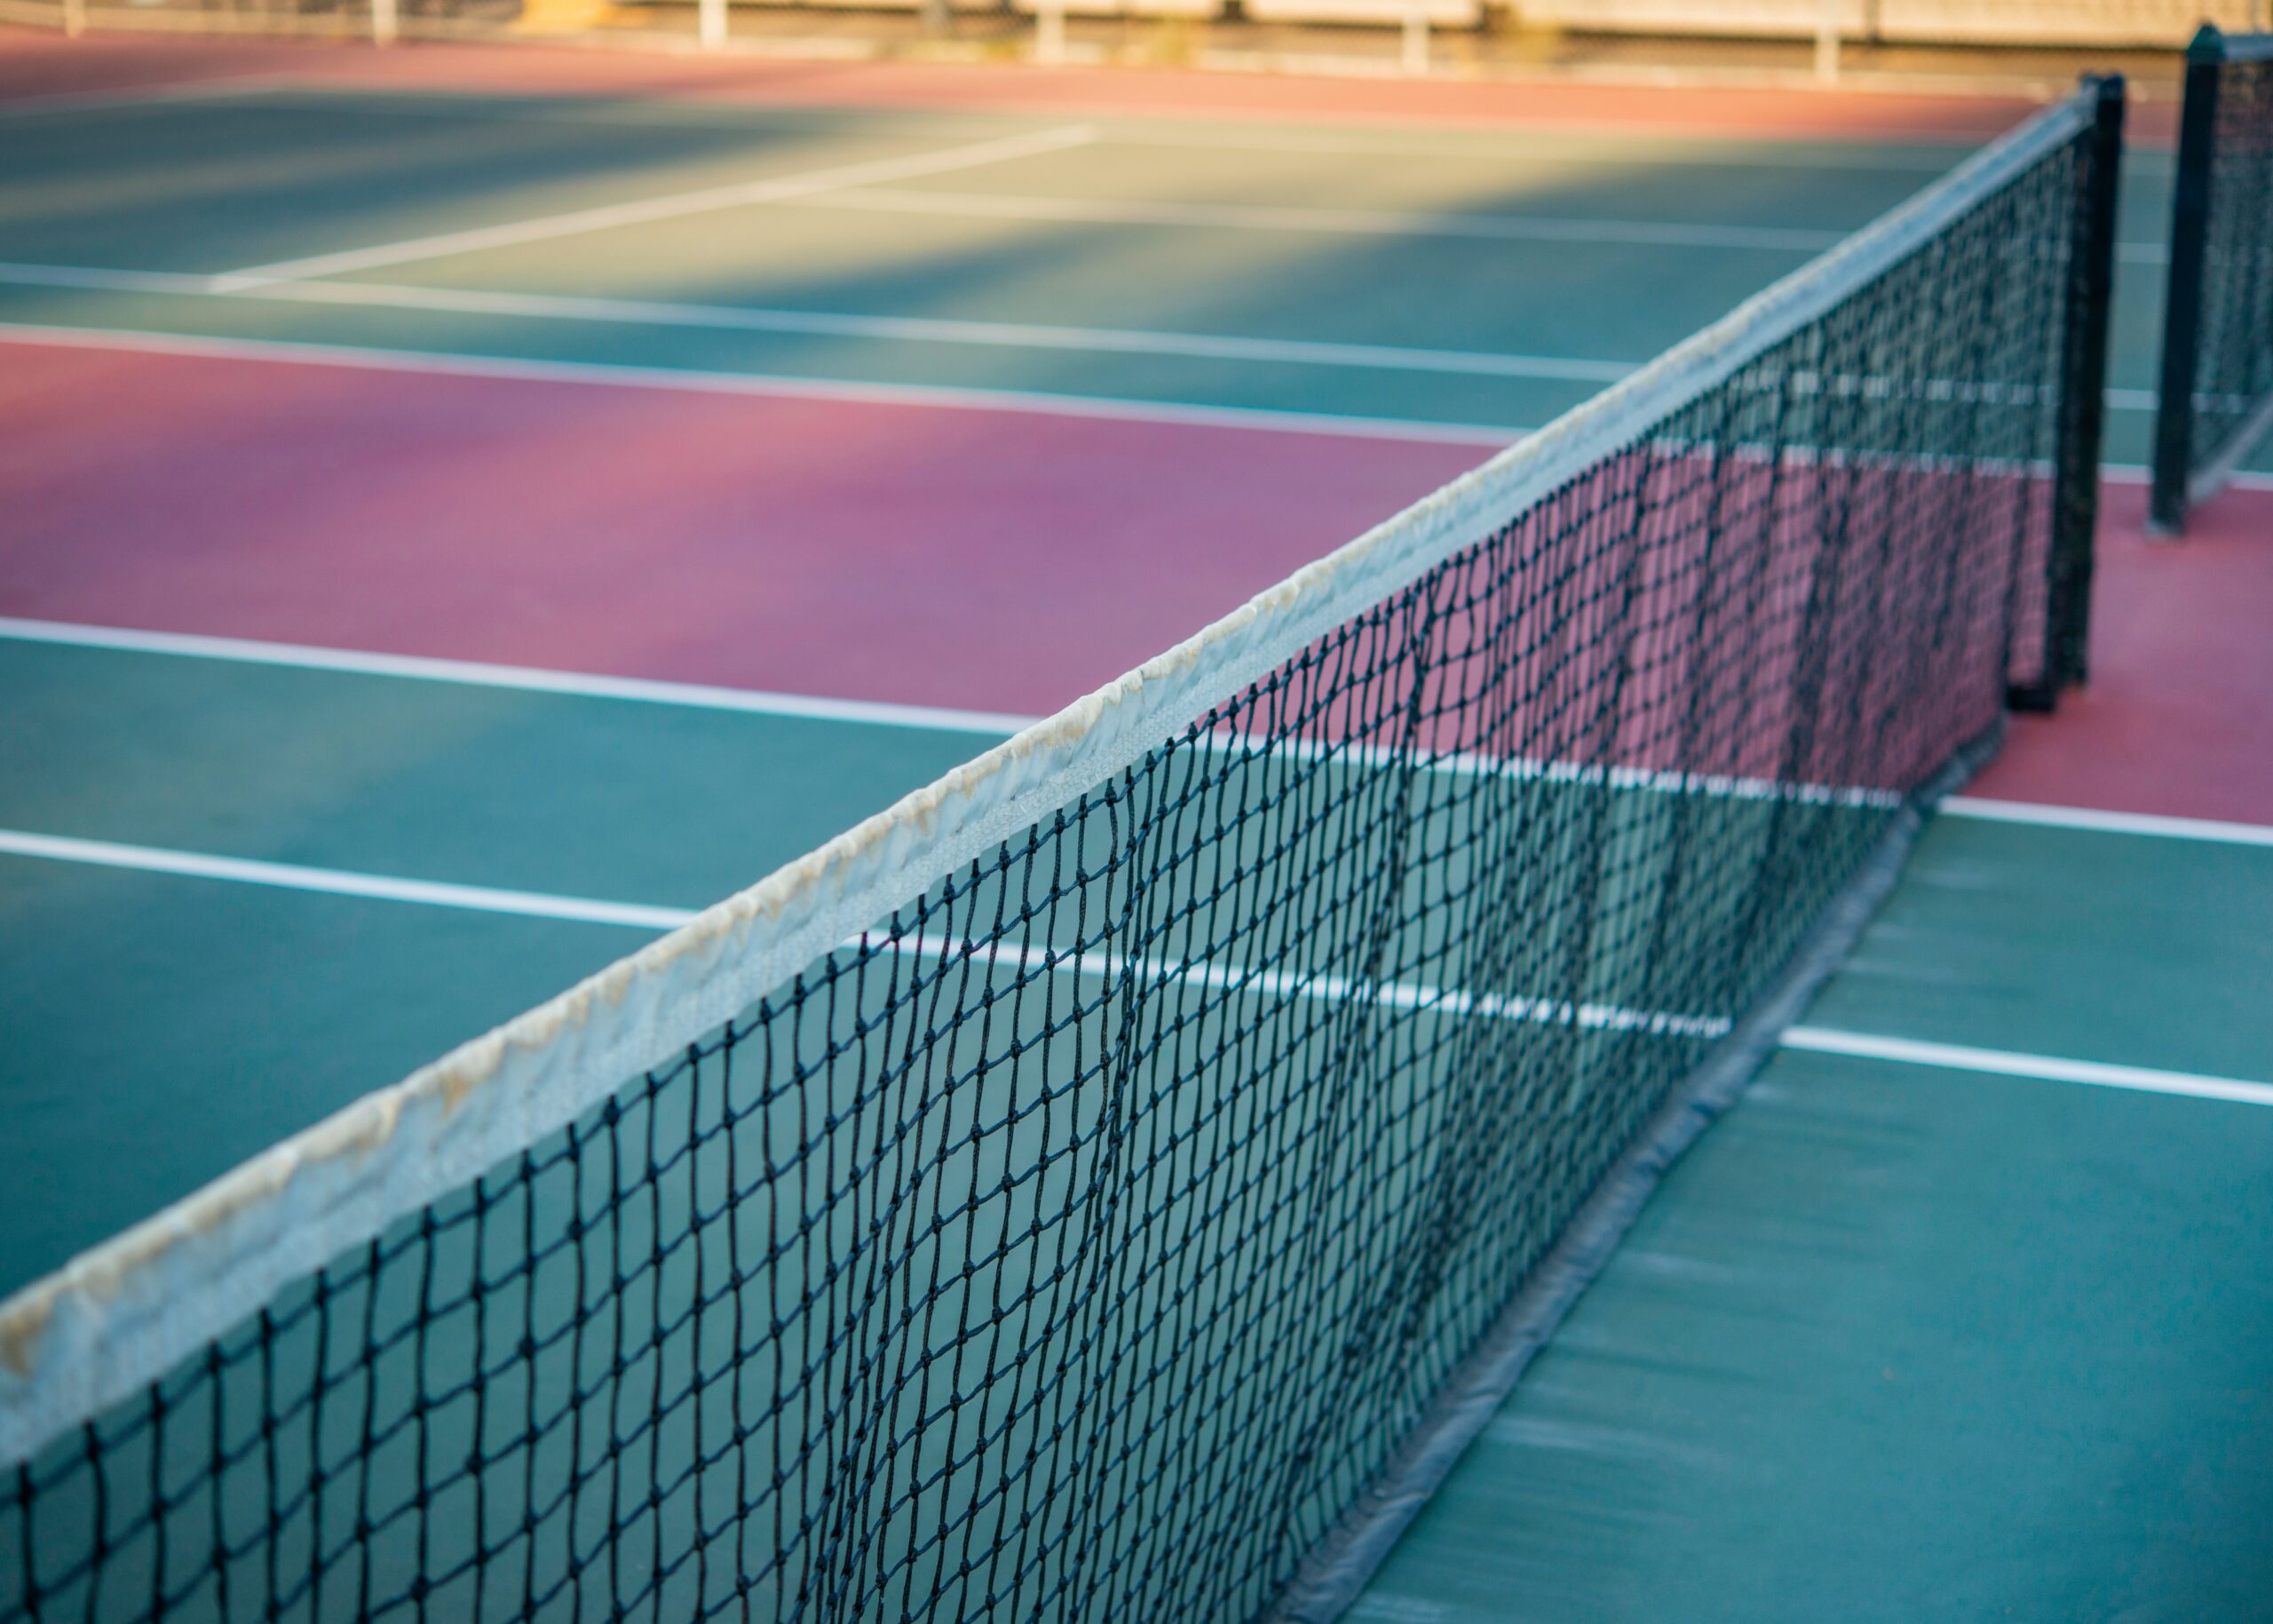 red and white tennis court